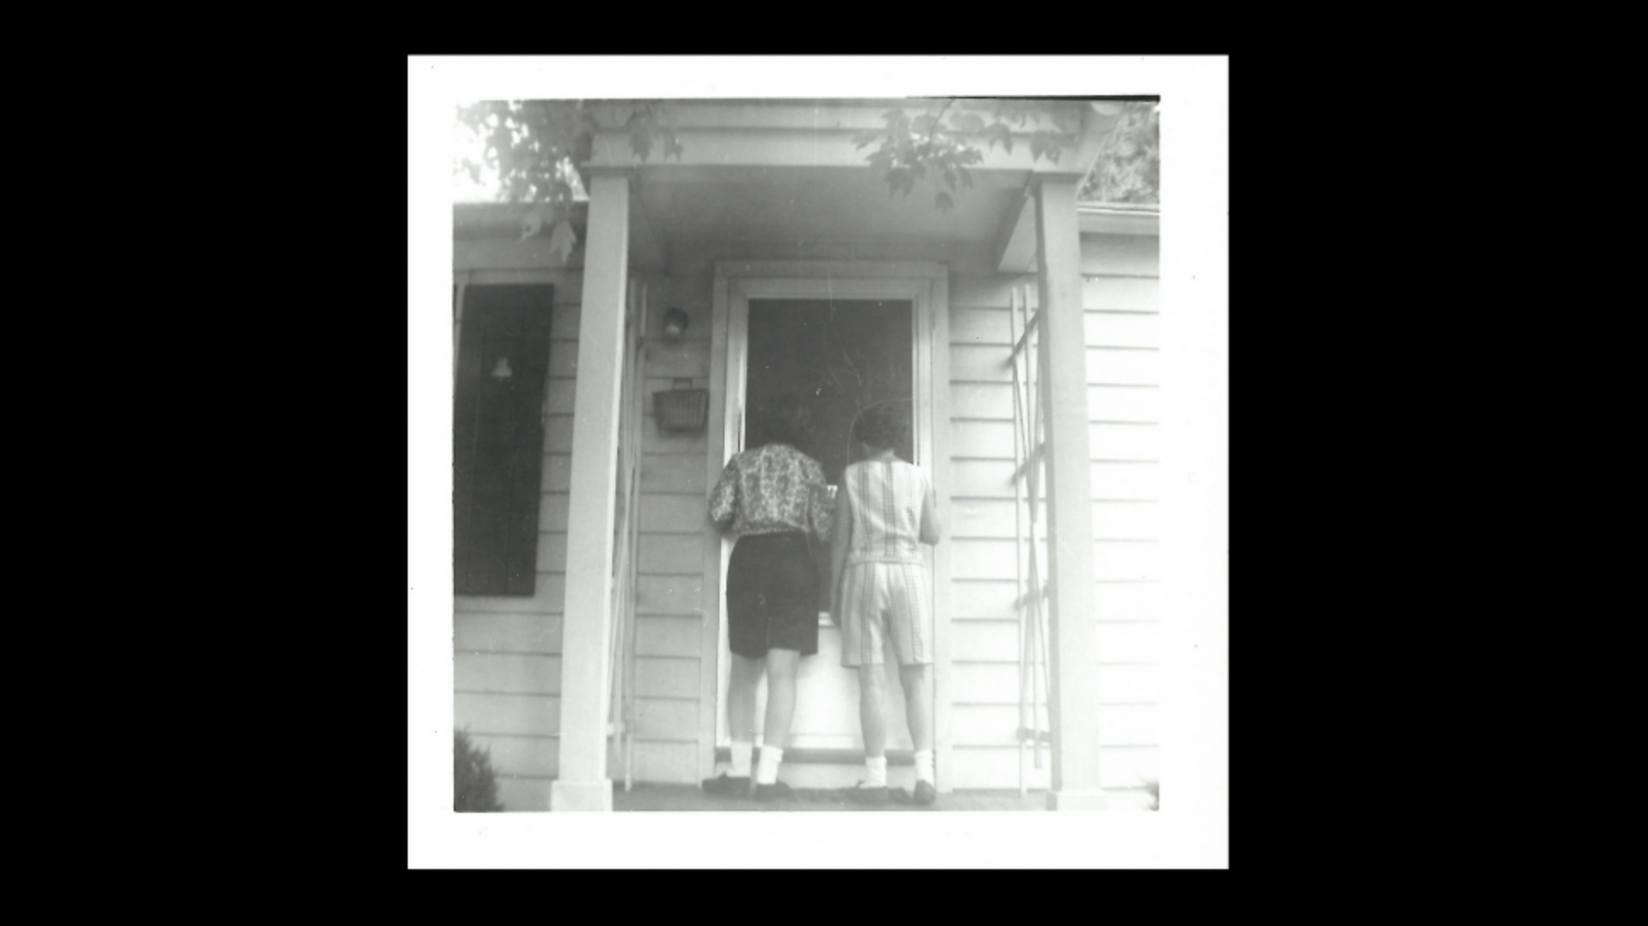 square black-and-white photo on black background, of two people standing on a porch facing away from camera